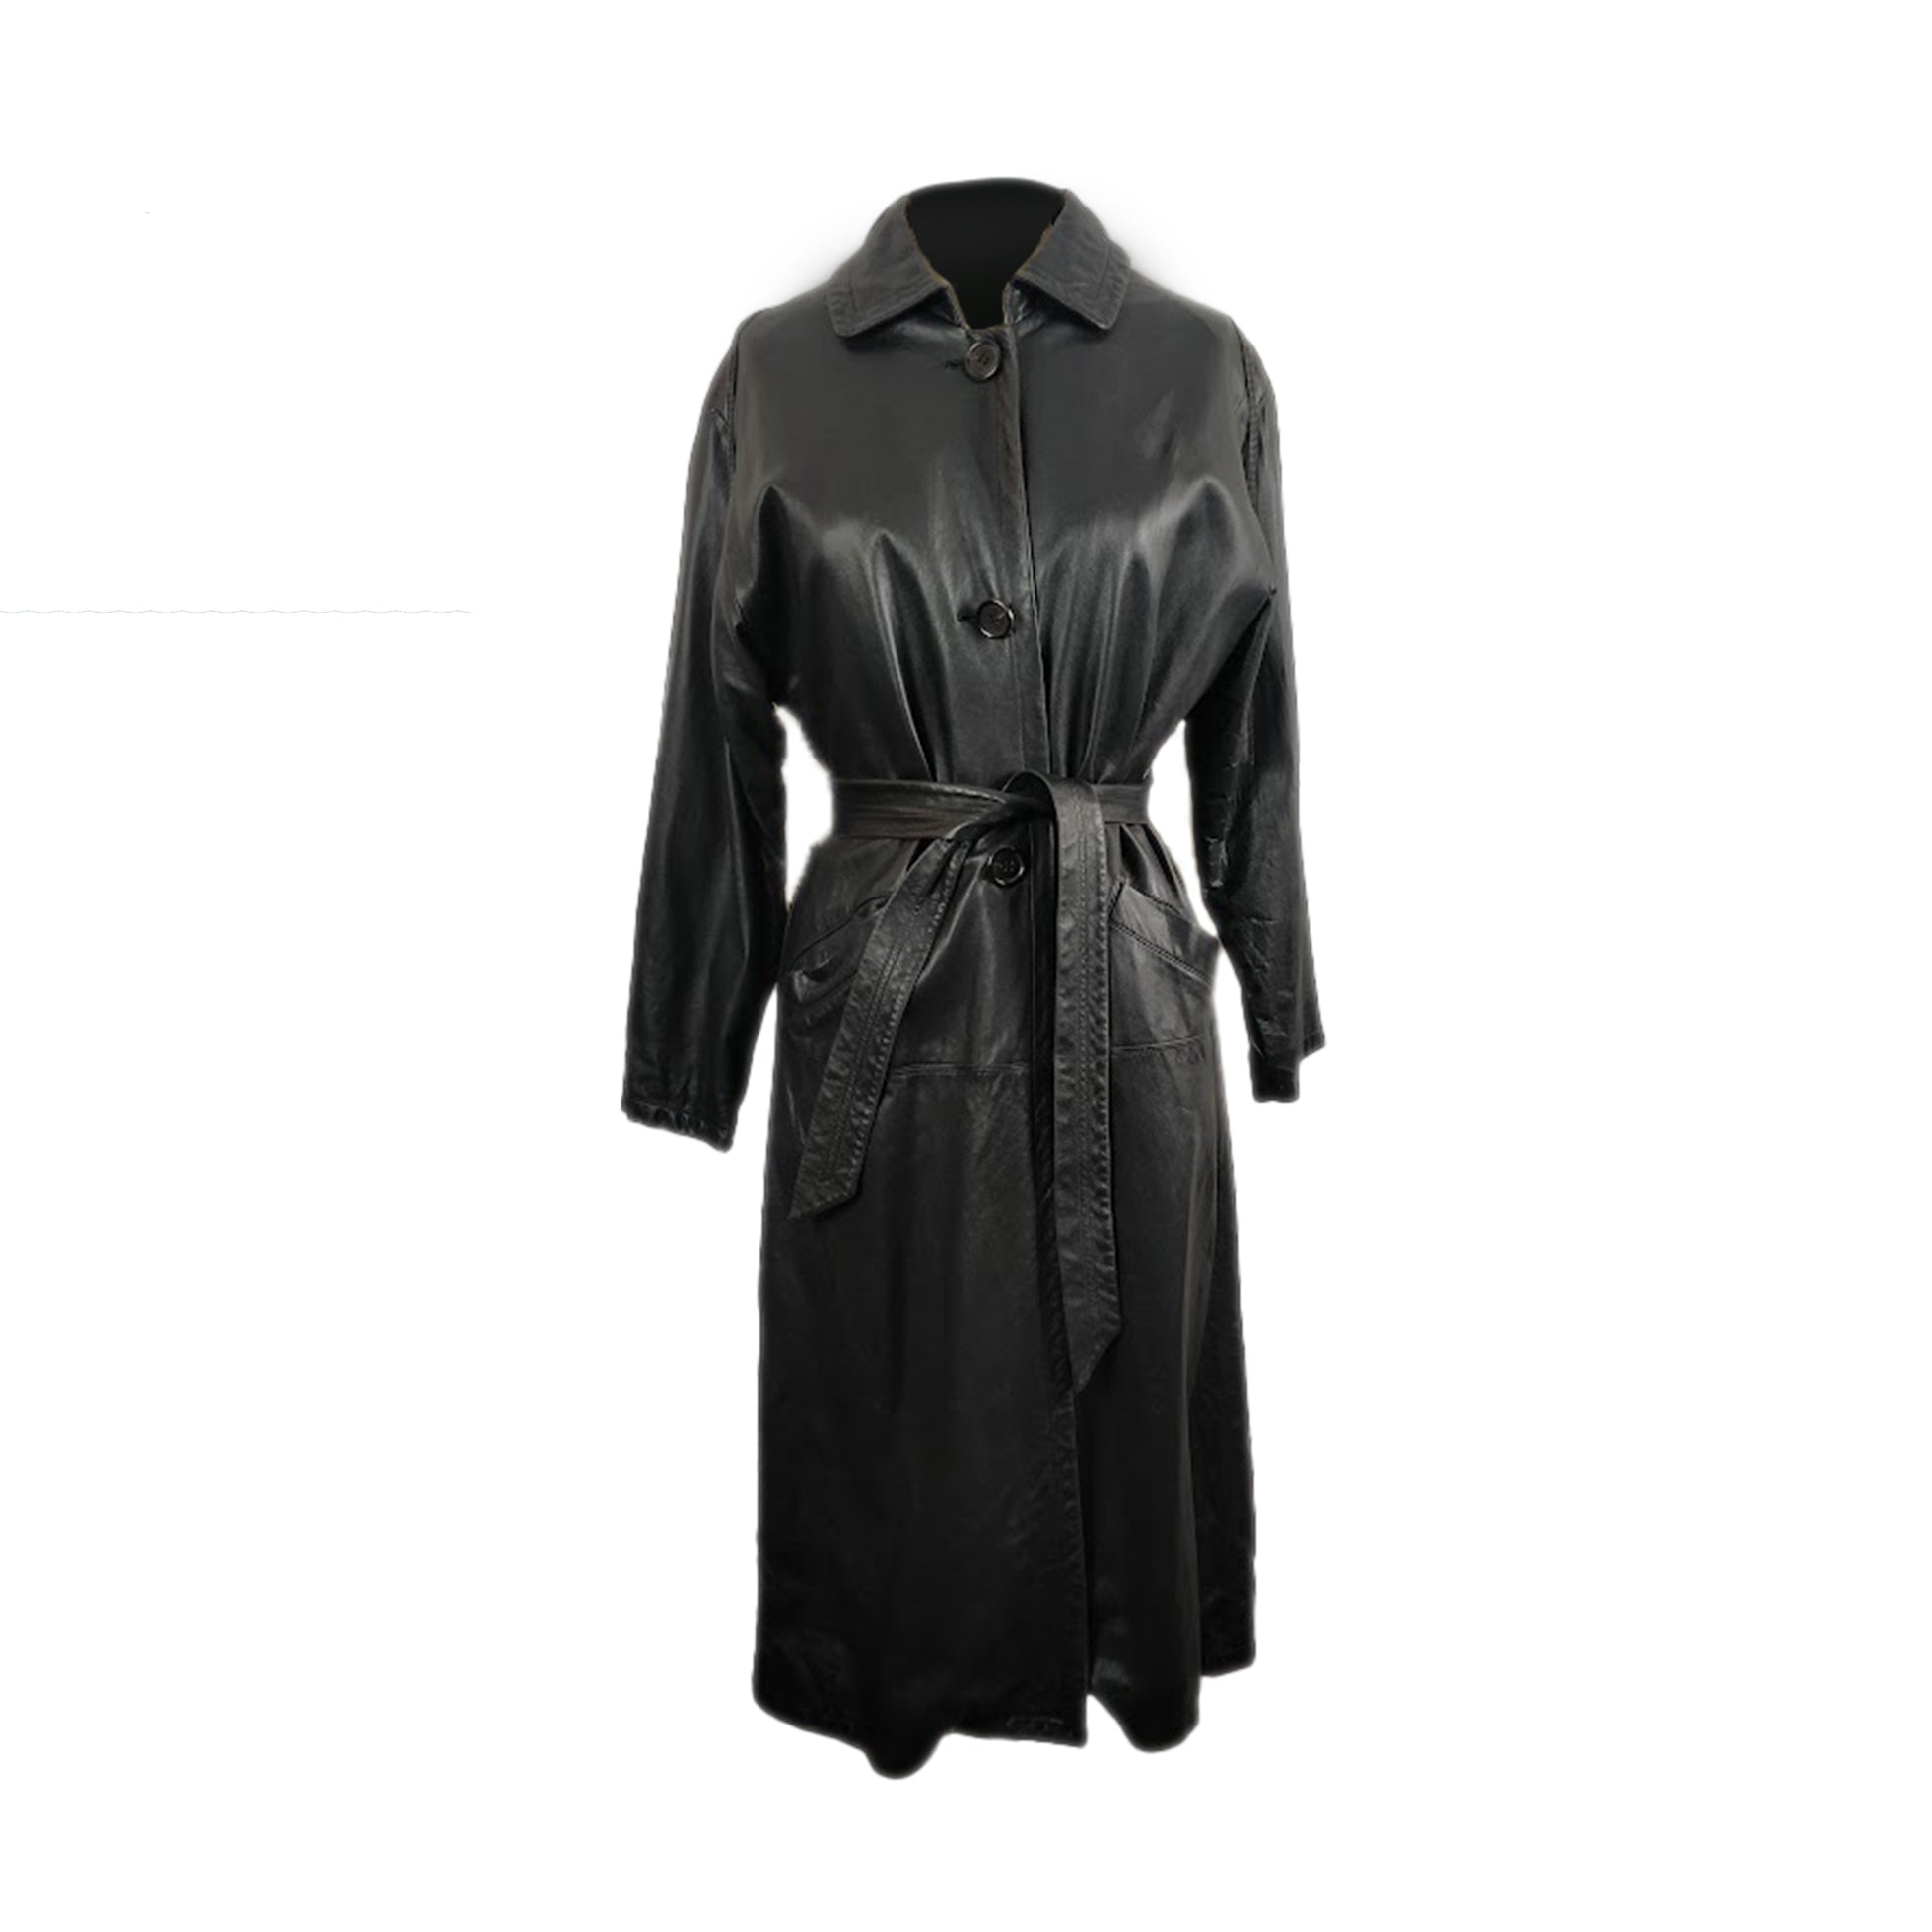 Black transitional lambskin trench coat with belt and back metal chain embroidery